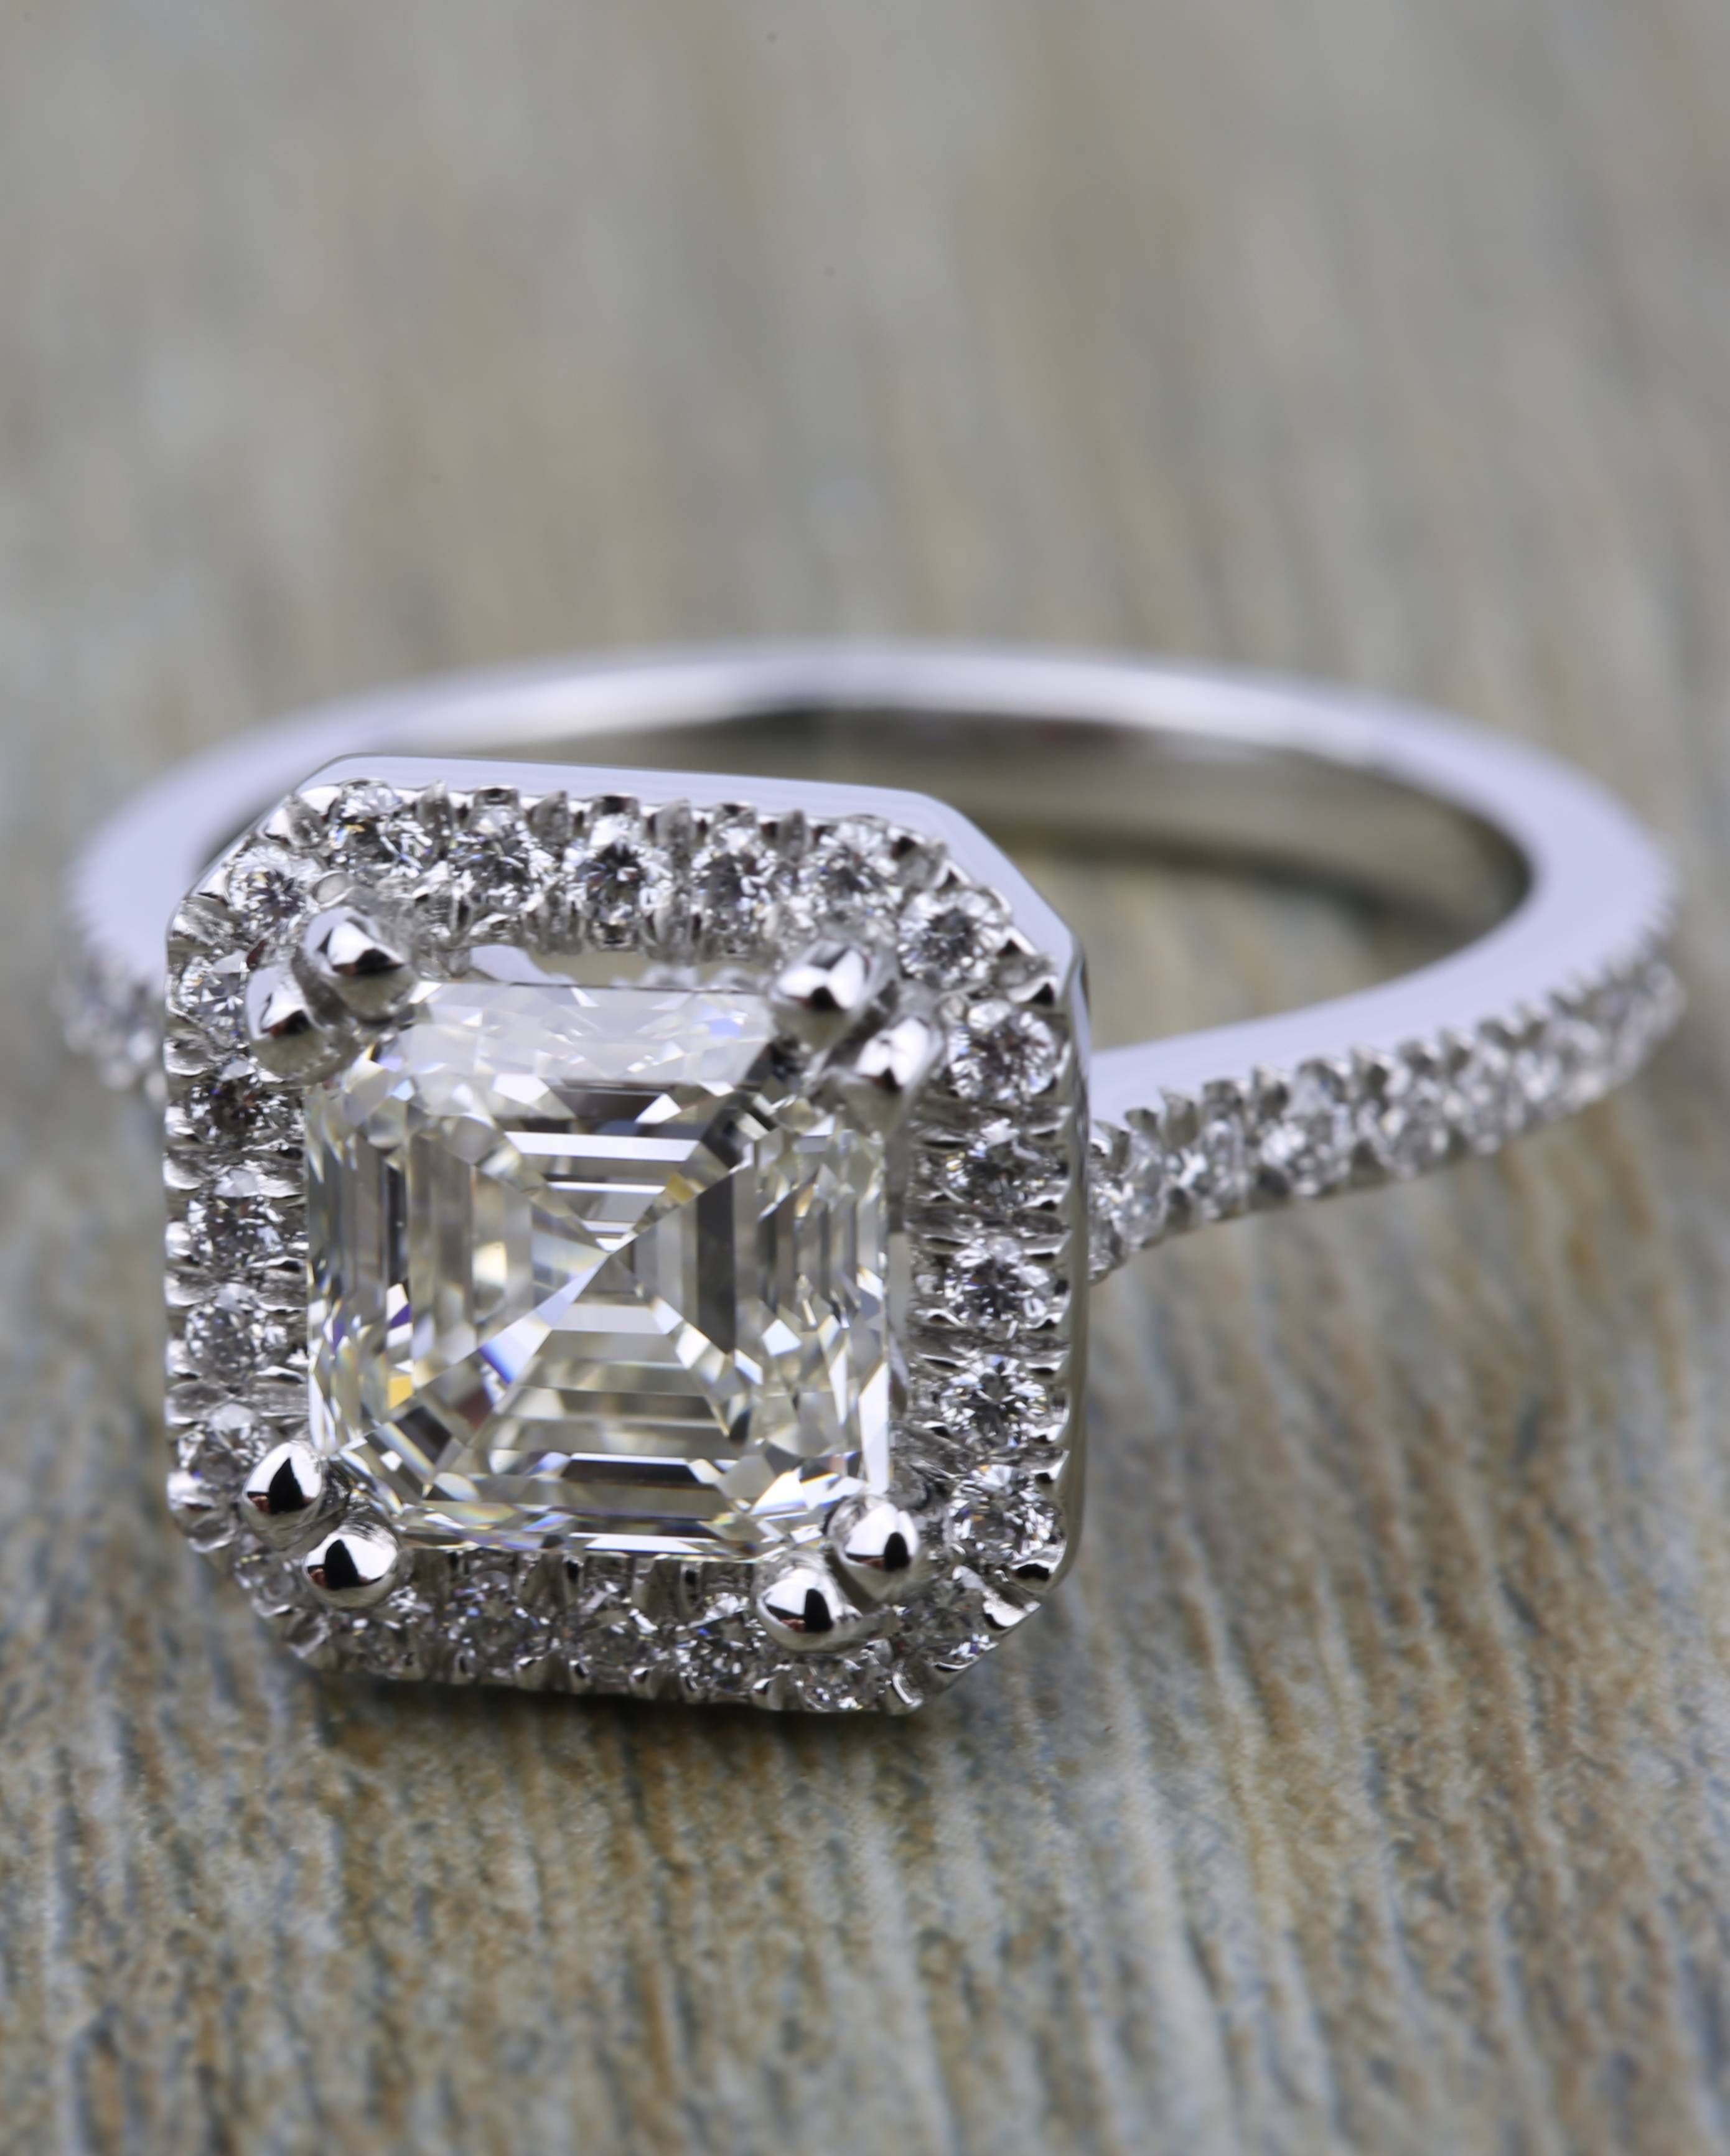 Engagement Rings : Stunning Real Diamond Engagement Rings Check With Diamond Engagement Rings Under  (View 3 of 15)